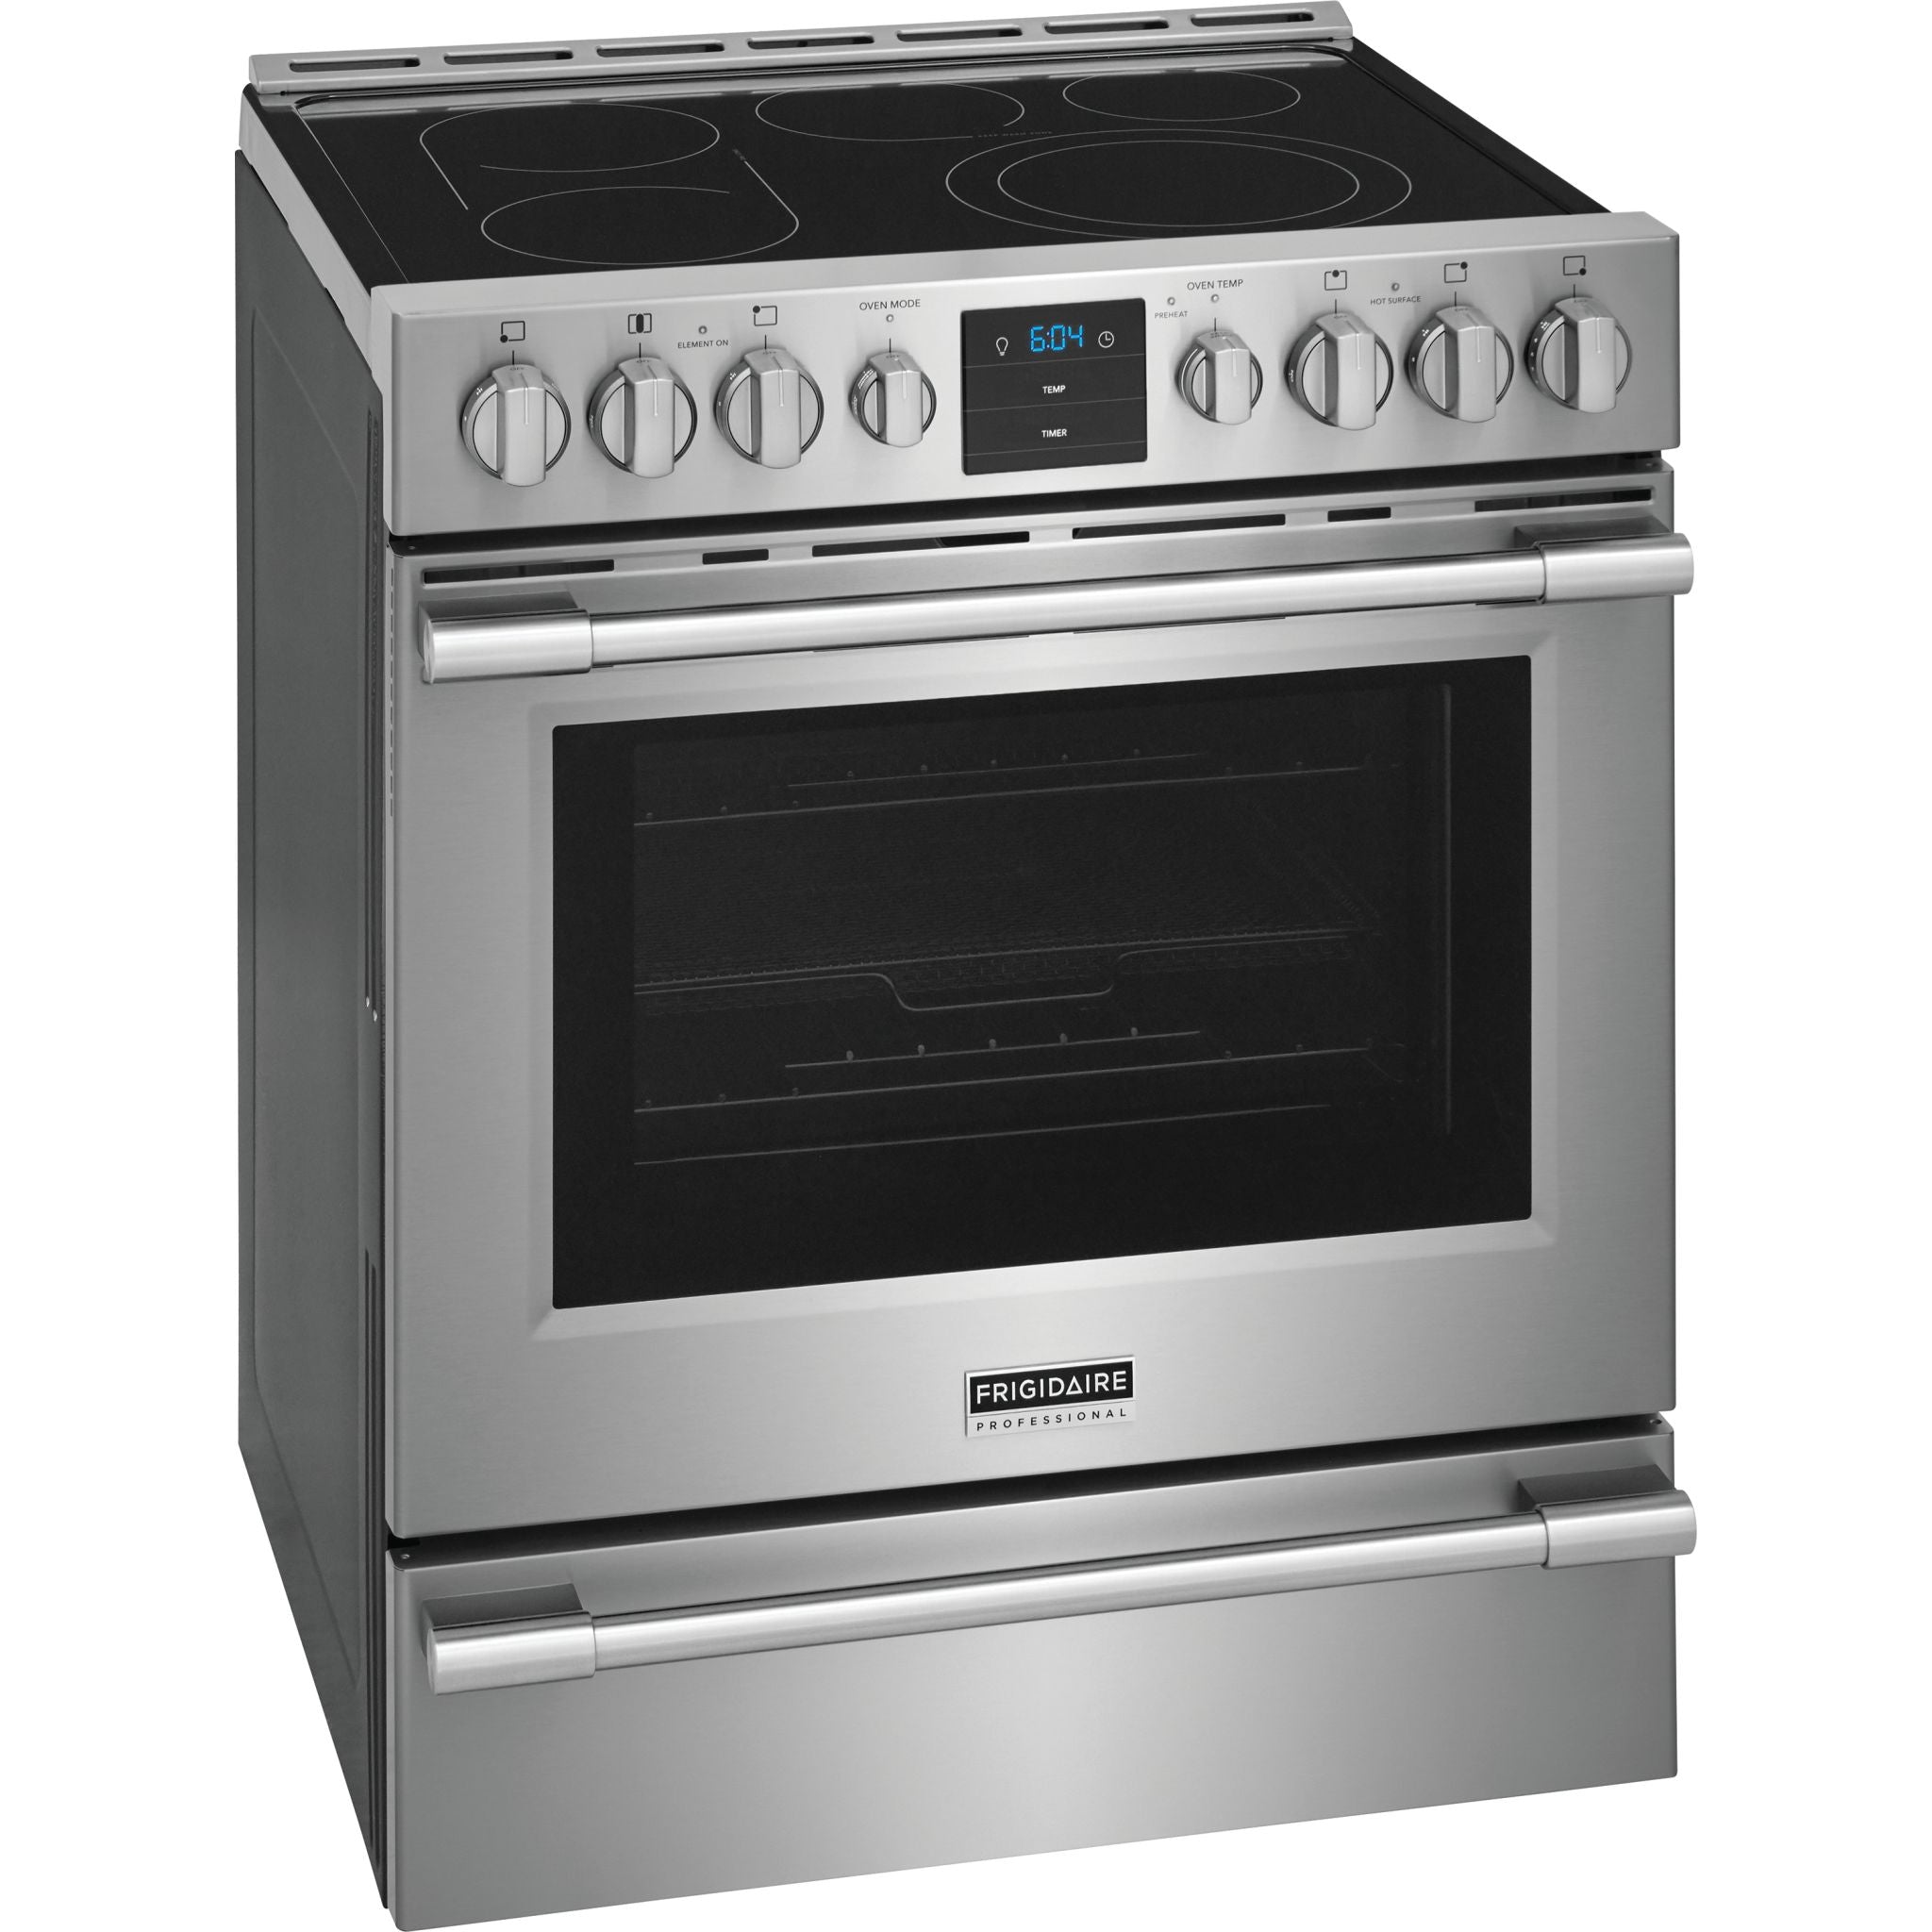 Frigidaire Professional, Frigidaire Professional Front Control Range (PCFE308CAF) - SmudgeProof Stainless Steel